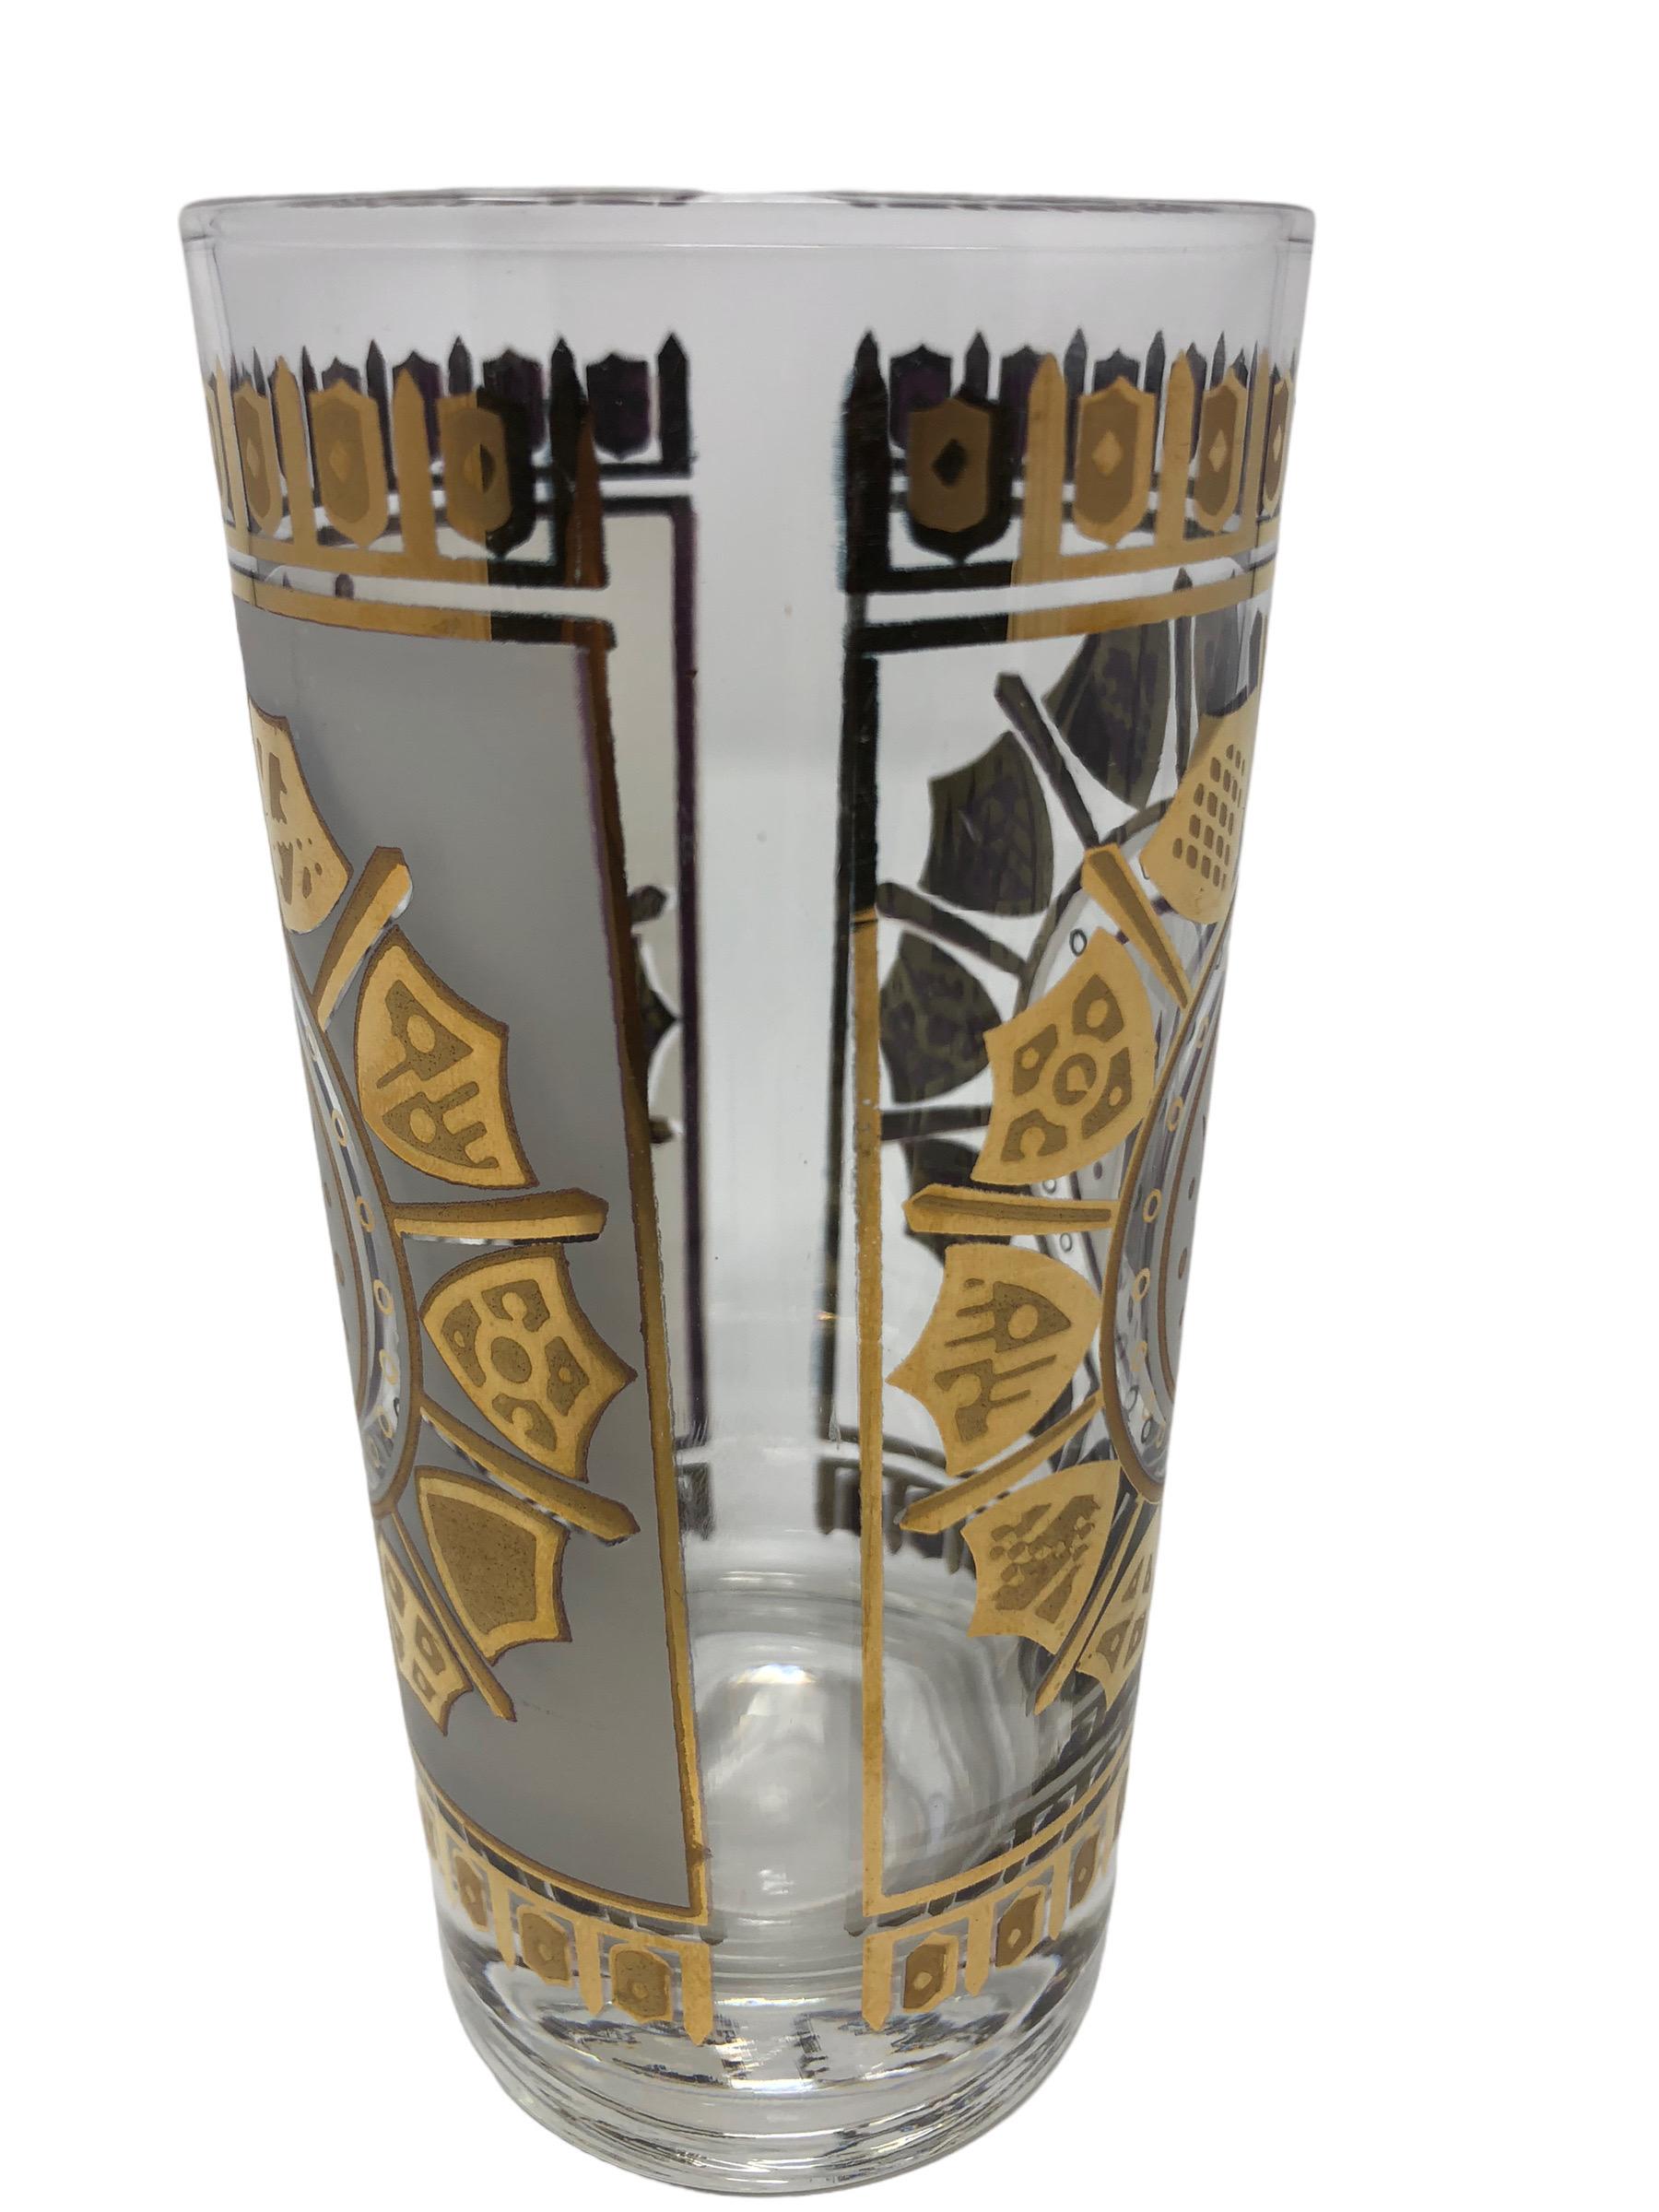 20th Century Set of 6 Highball Glasses with Crowns and Shields Decoration. For Sale